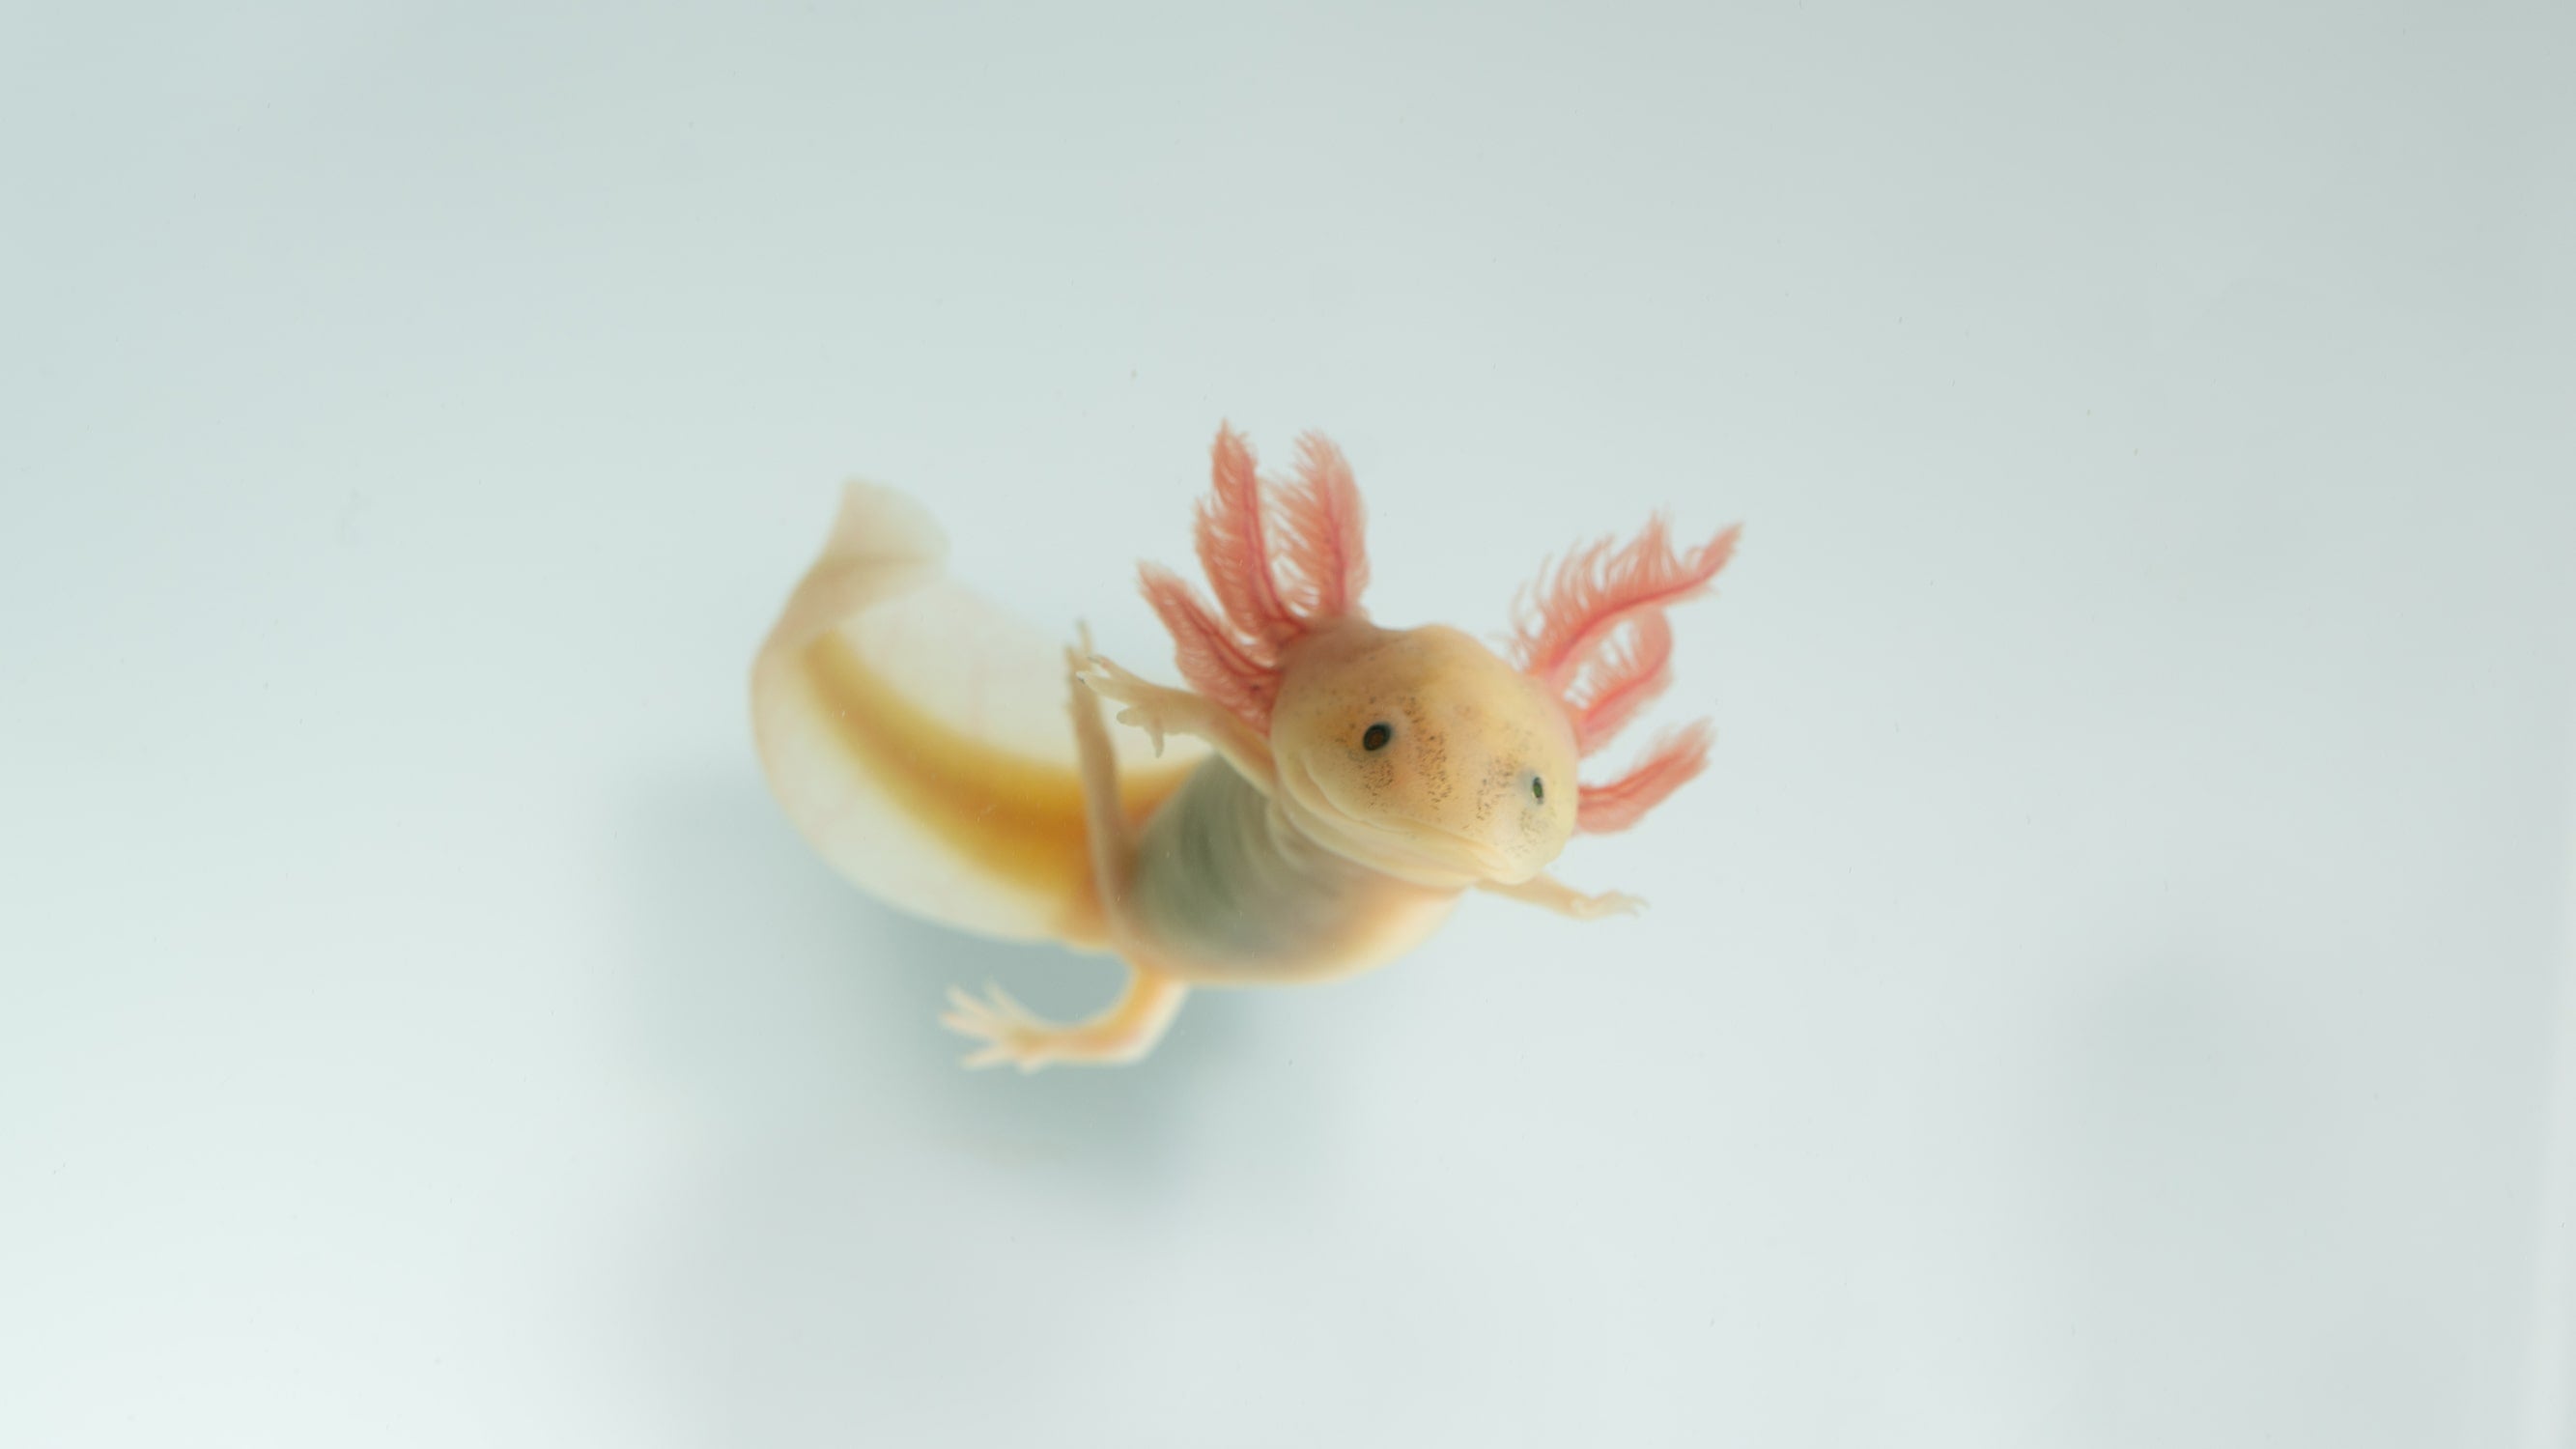 The Best Axolotl Care Guide in the World